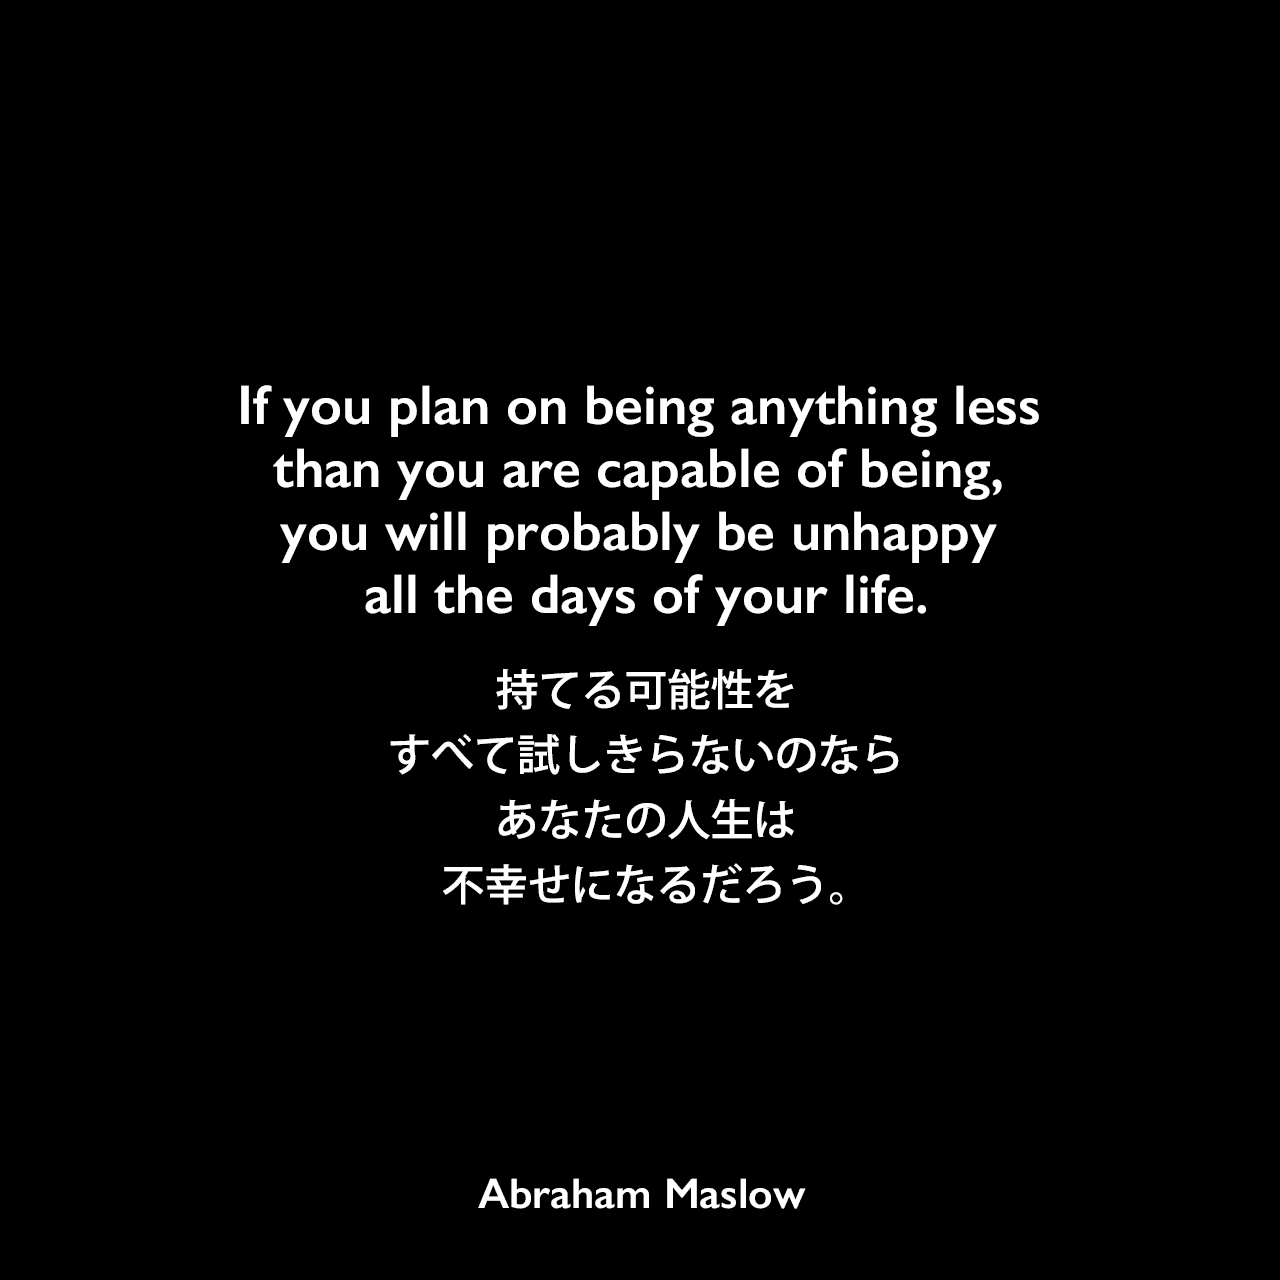 If you plan on being anything less than you are capable of being, you will probably be unhappy all the days of your life.持てる可能性をすべて試しきらないのなら、あなたの人生は不幸せになるだろう。Abraham Maslow